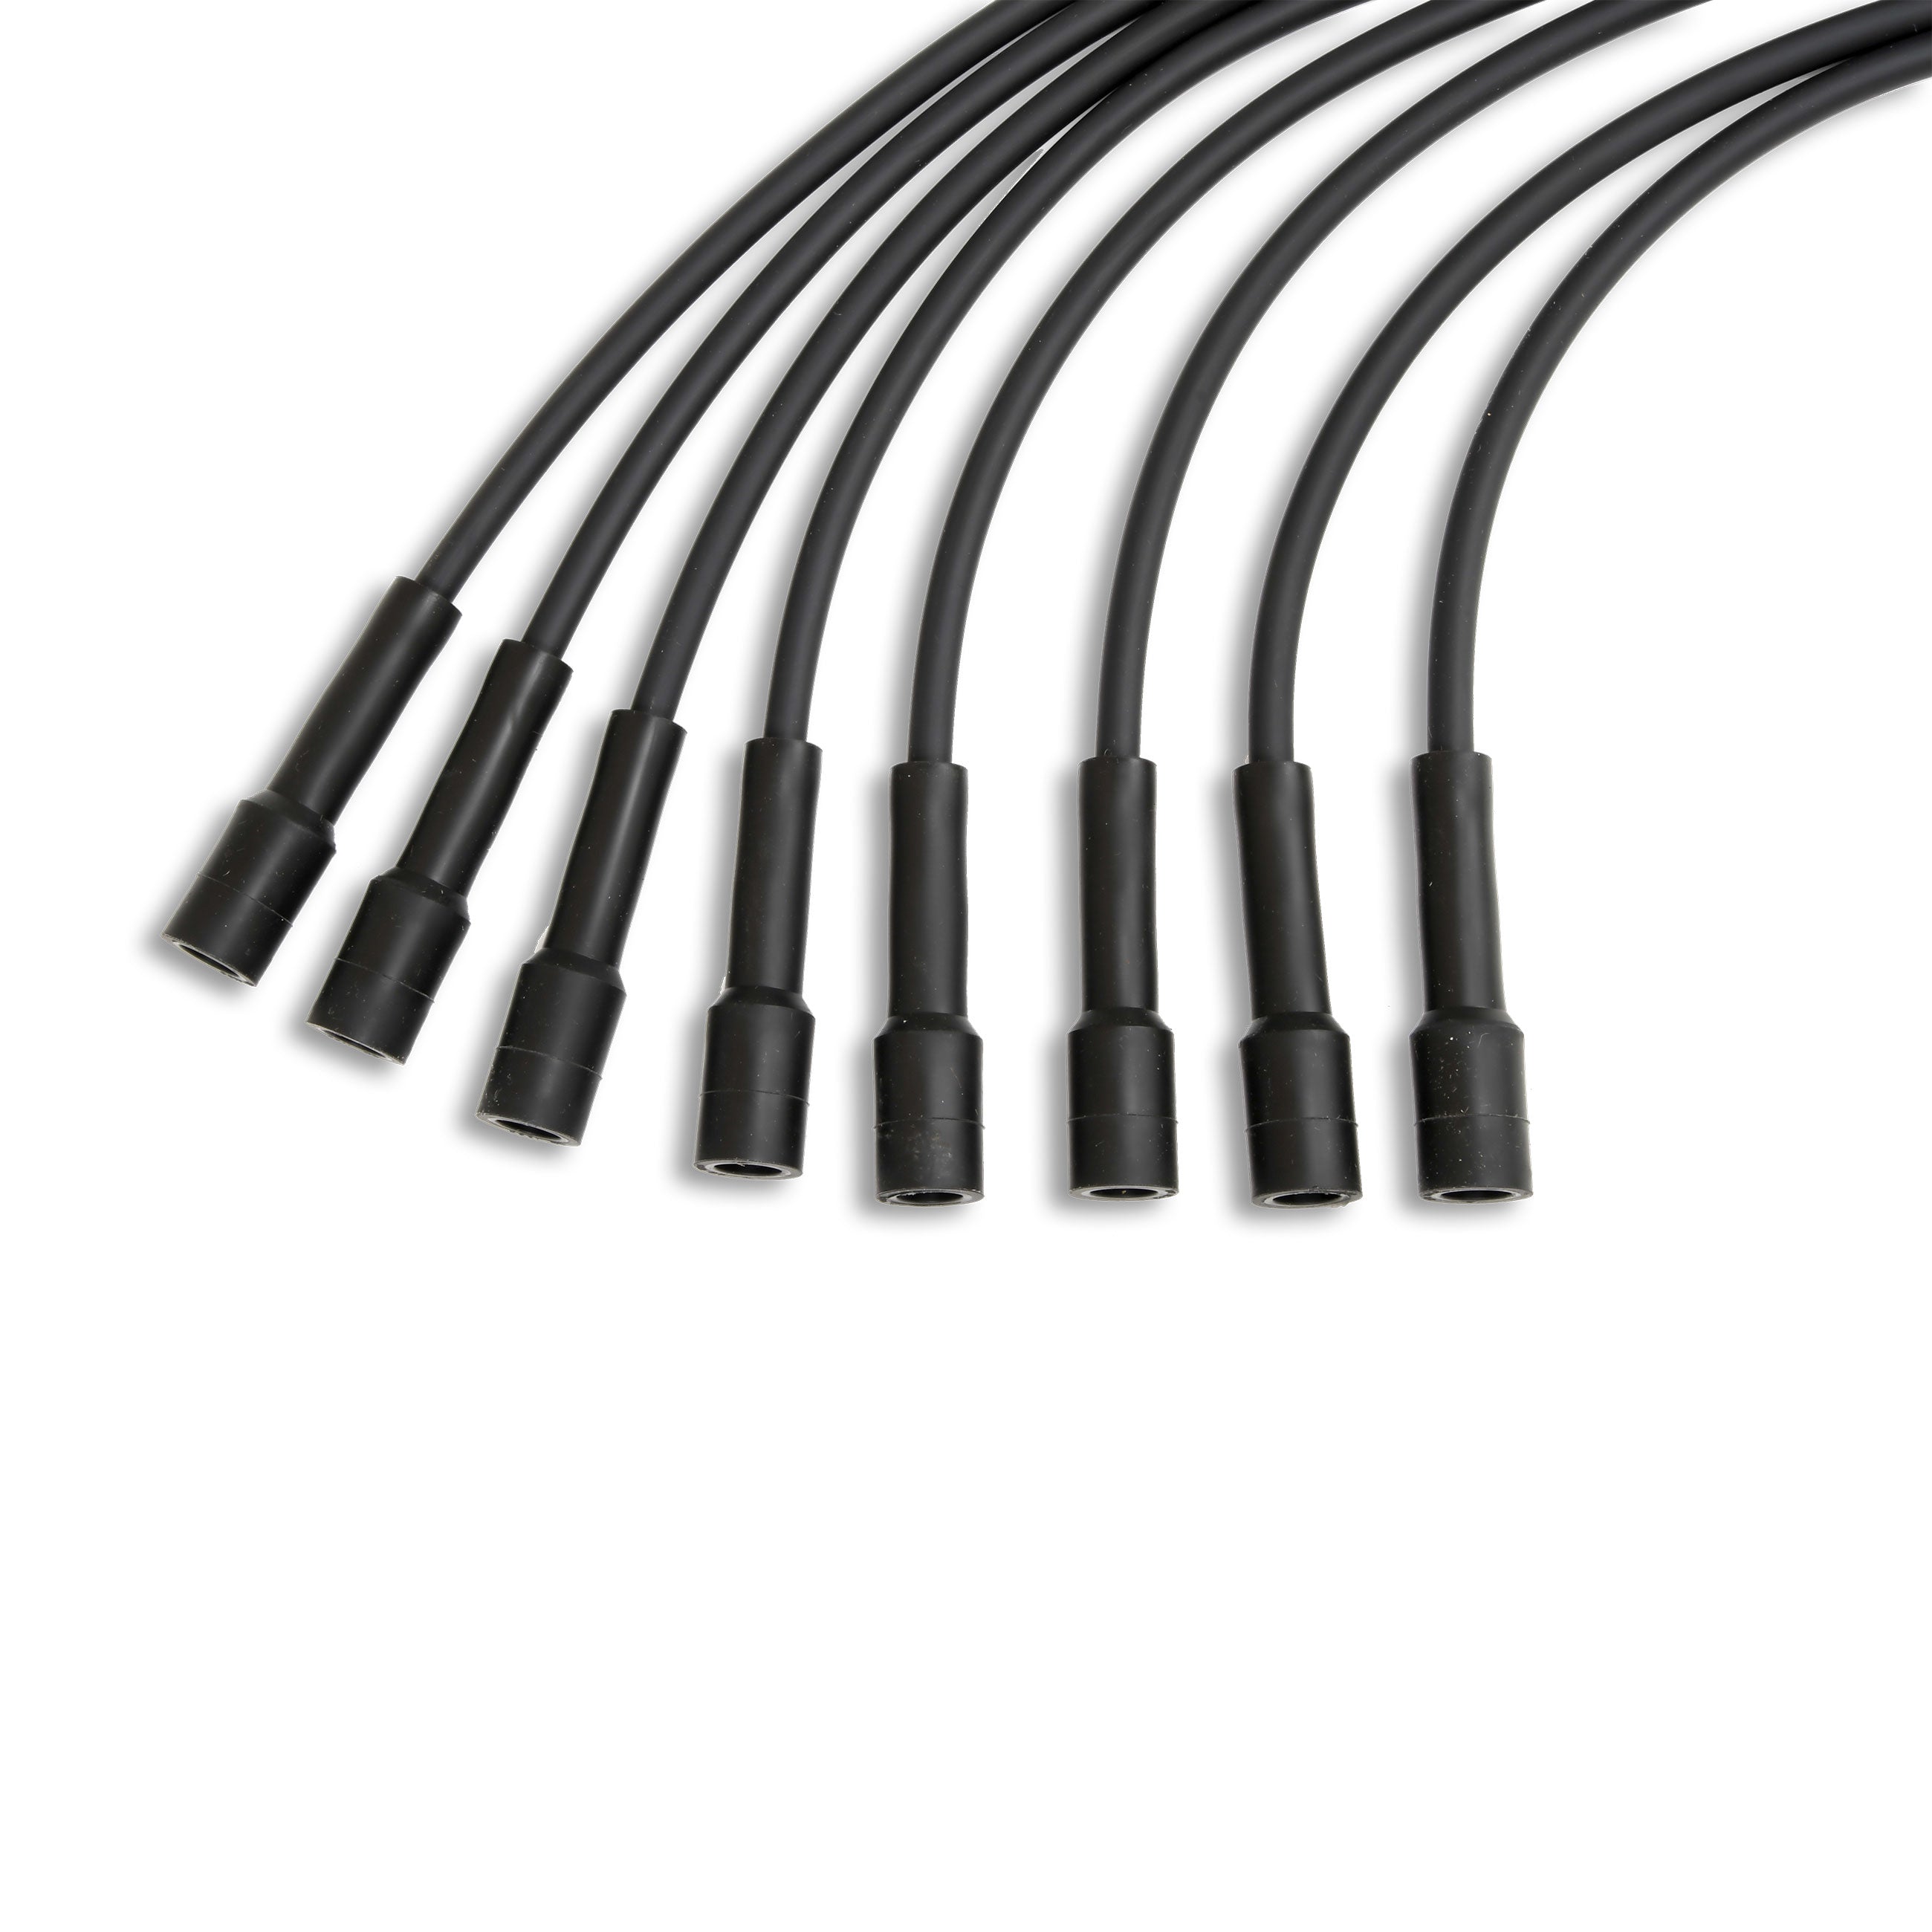 PerTronix 708105 Flame-Thrower Spark Plug Wires 8 cyl Custom Fit